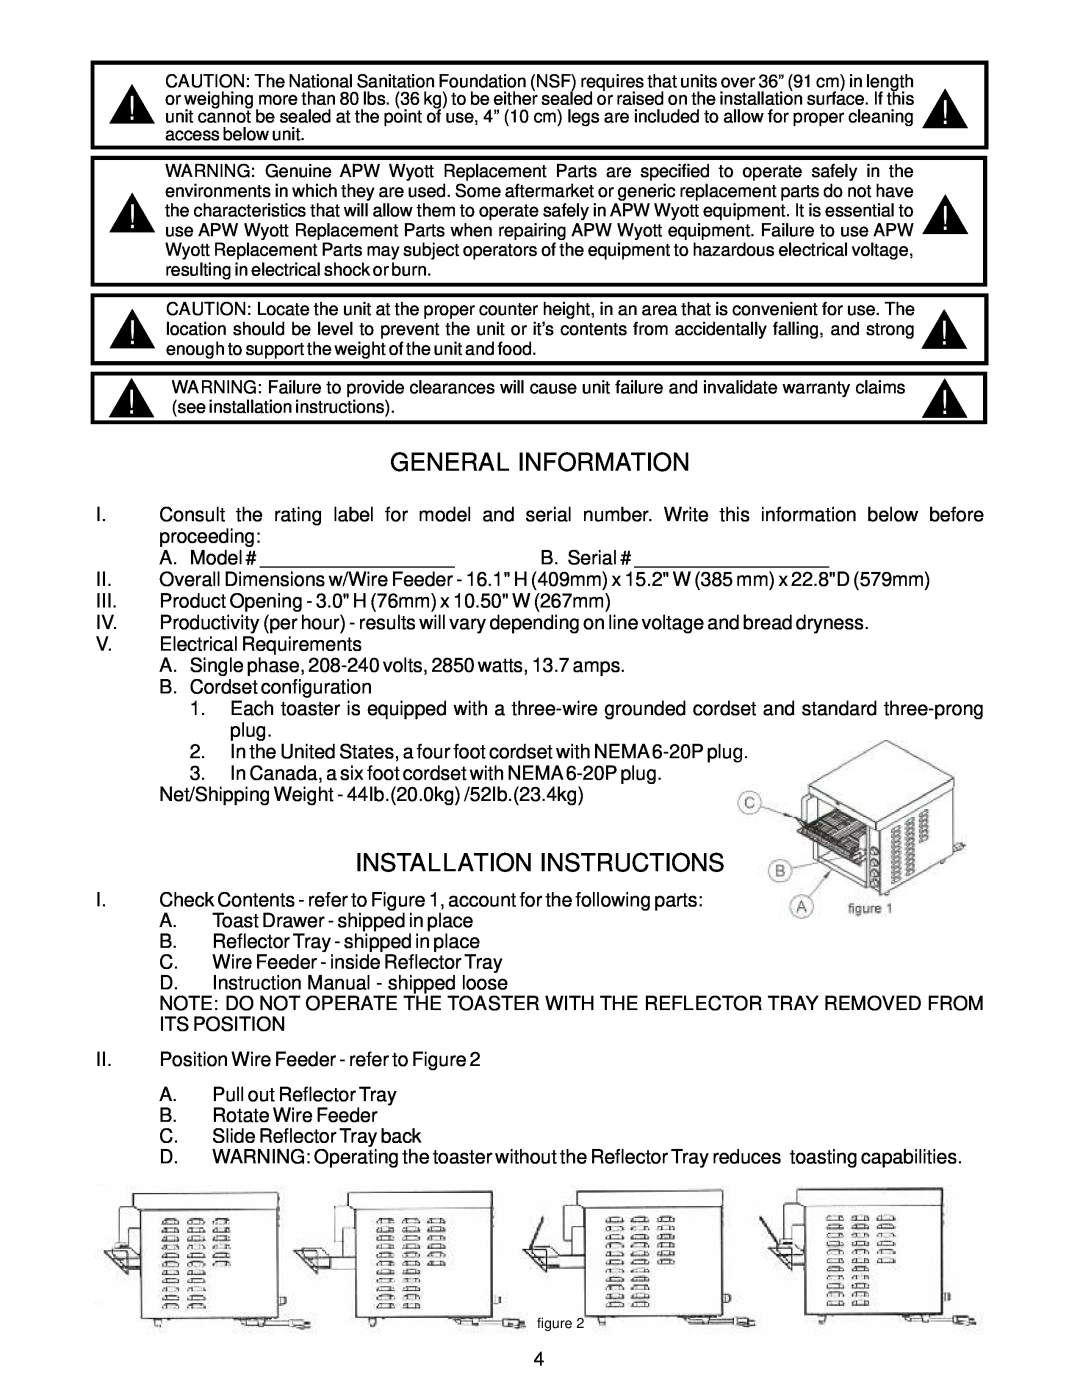 APW Wyott FT 800H operating instructions General Information, Installation Instructions 